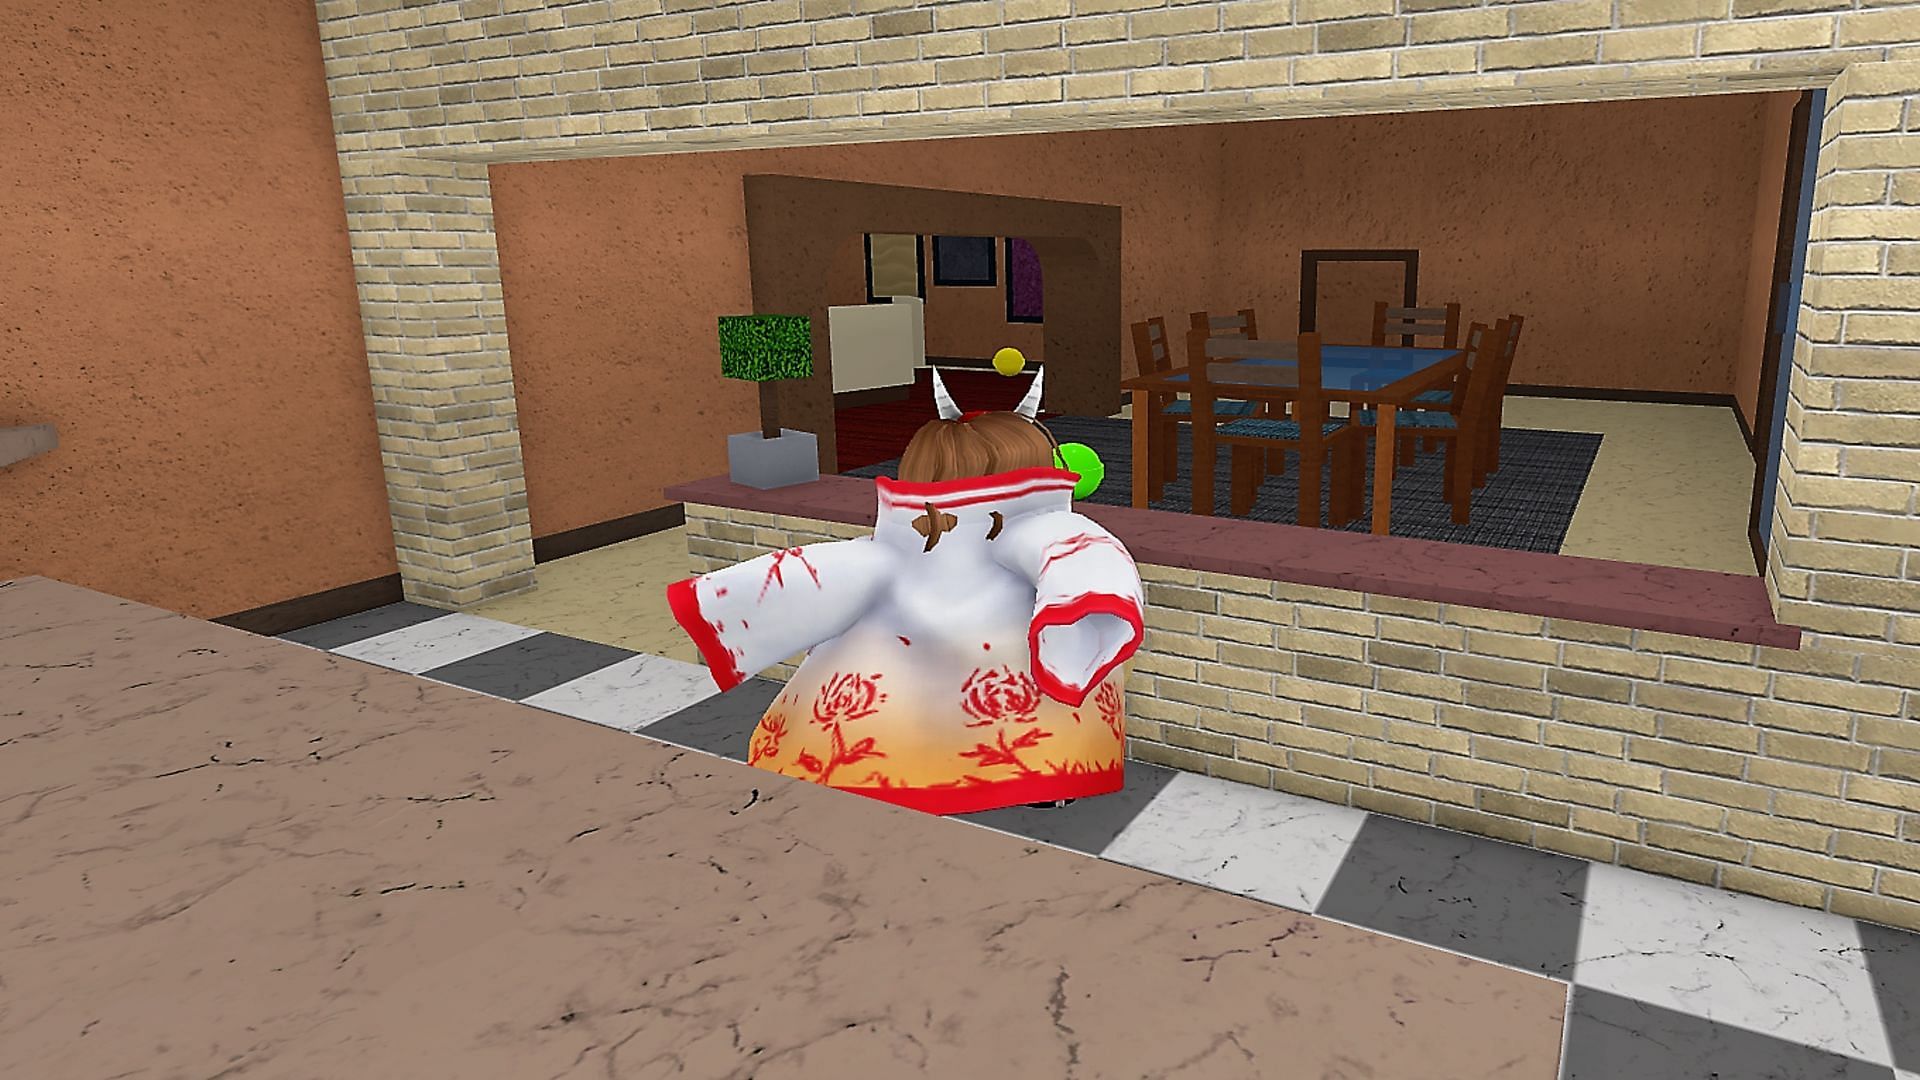 Jam out to good tunes as you&#039;re playing. (Image via Roblox)